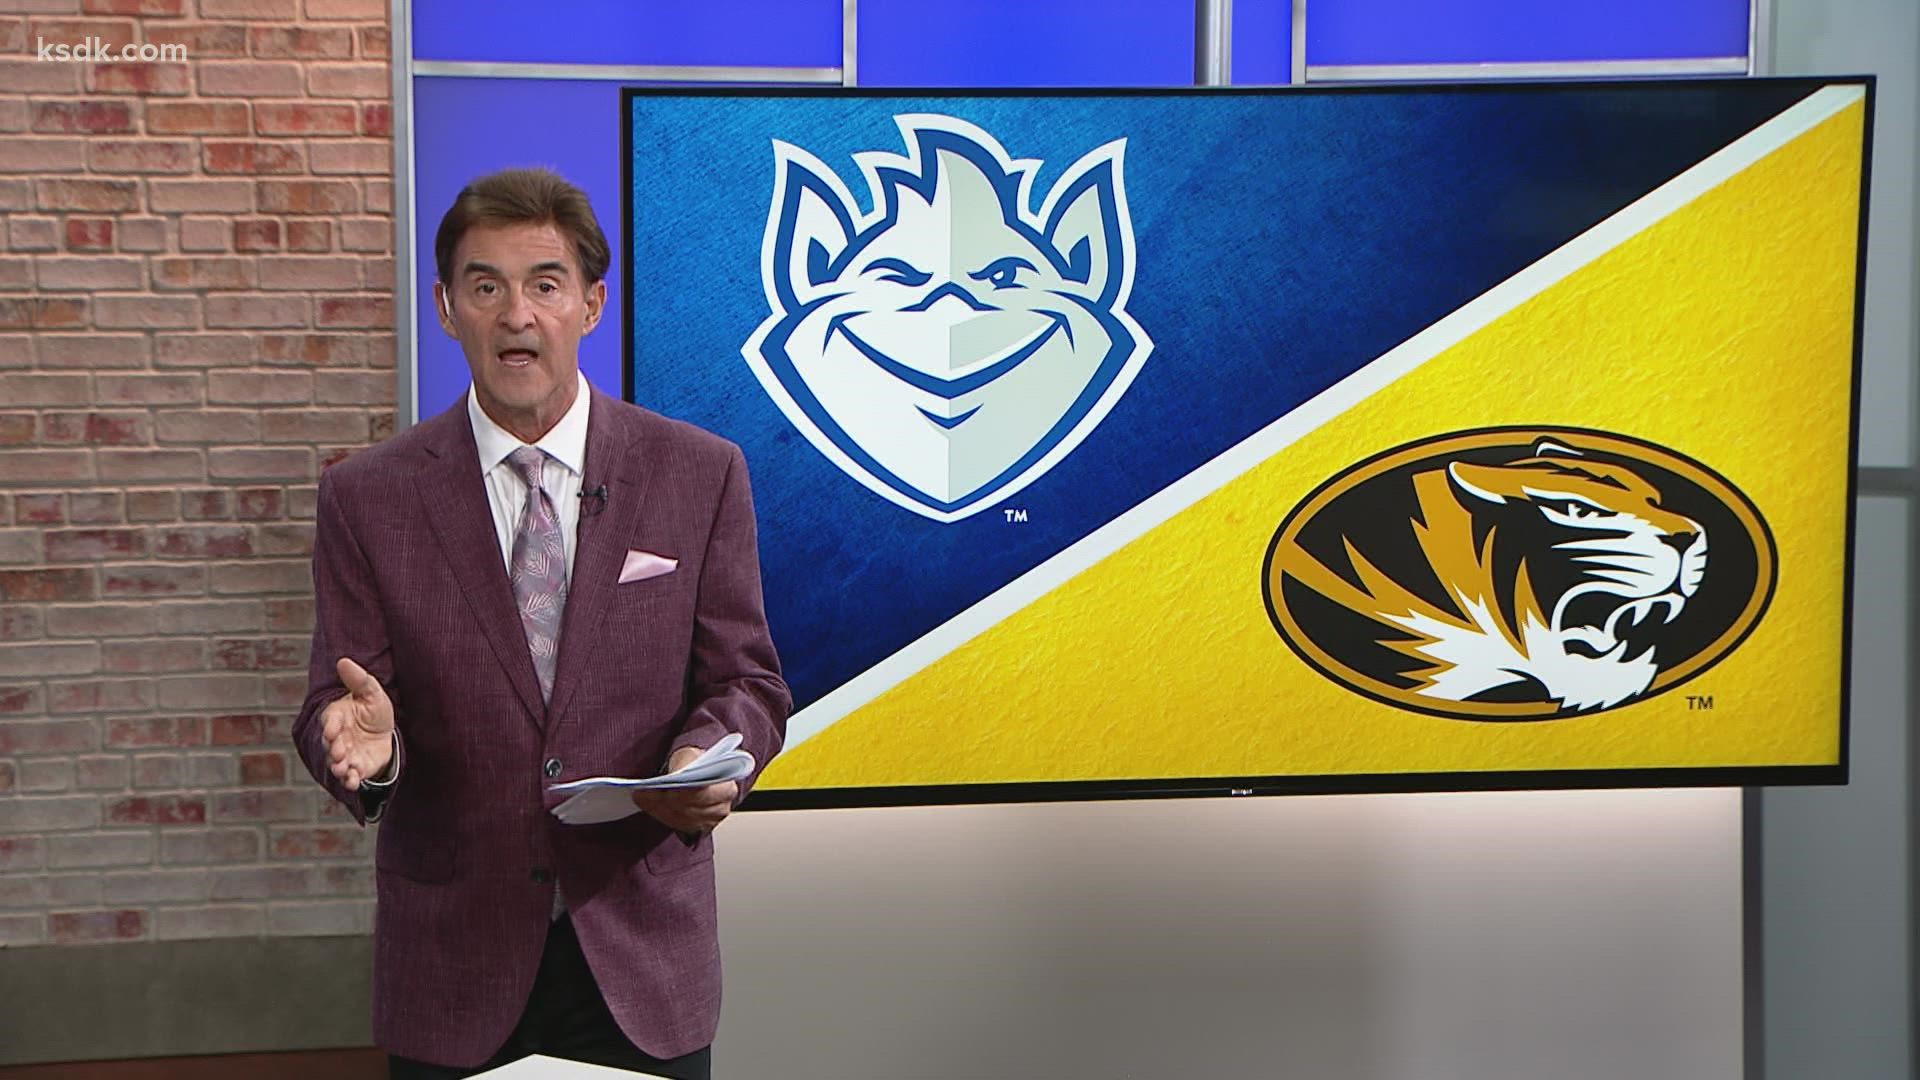 "It's St. Louis, Missouri not St. Louis, Kansas." Frank gives his view on the fan rivalry between Mizzou and SLU.